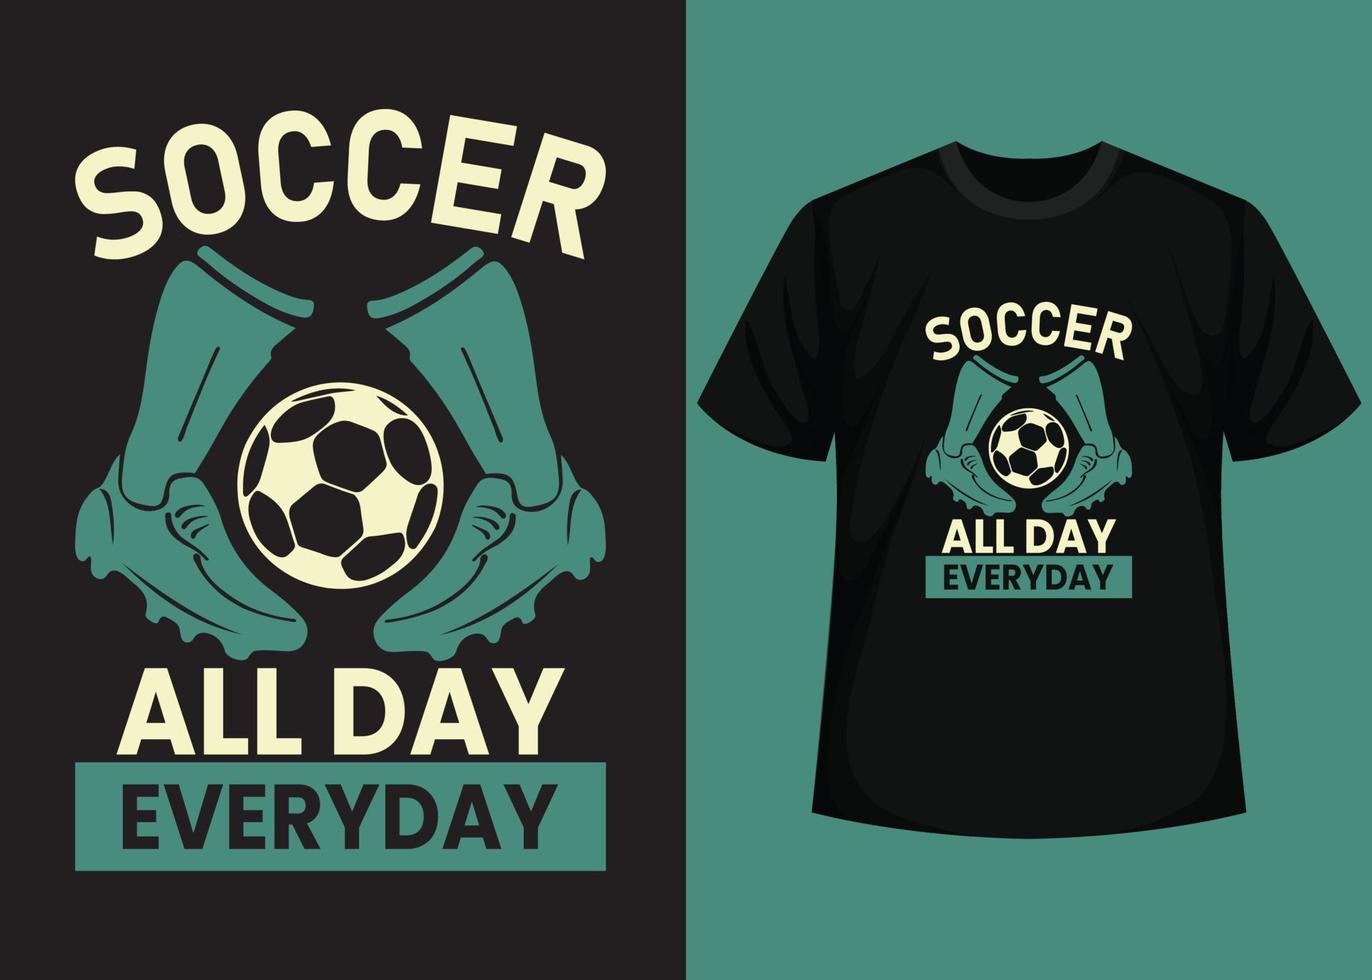 Soccer All Day Everyday T shirt Design. Best Happy Football Day T Shirt Design. T-shirt Design, Typography T Shirt, Vector and Illustration Elements for a Printable Products.